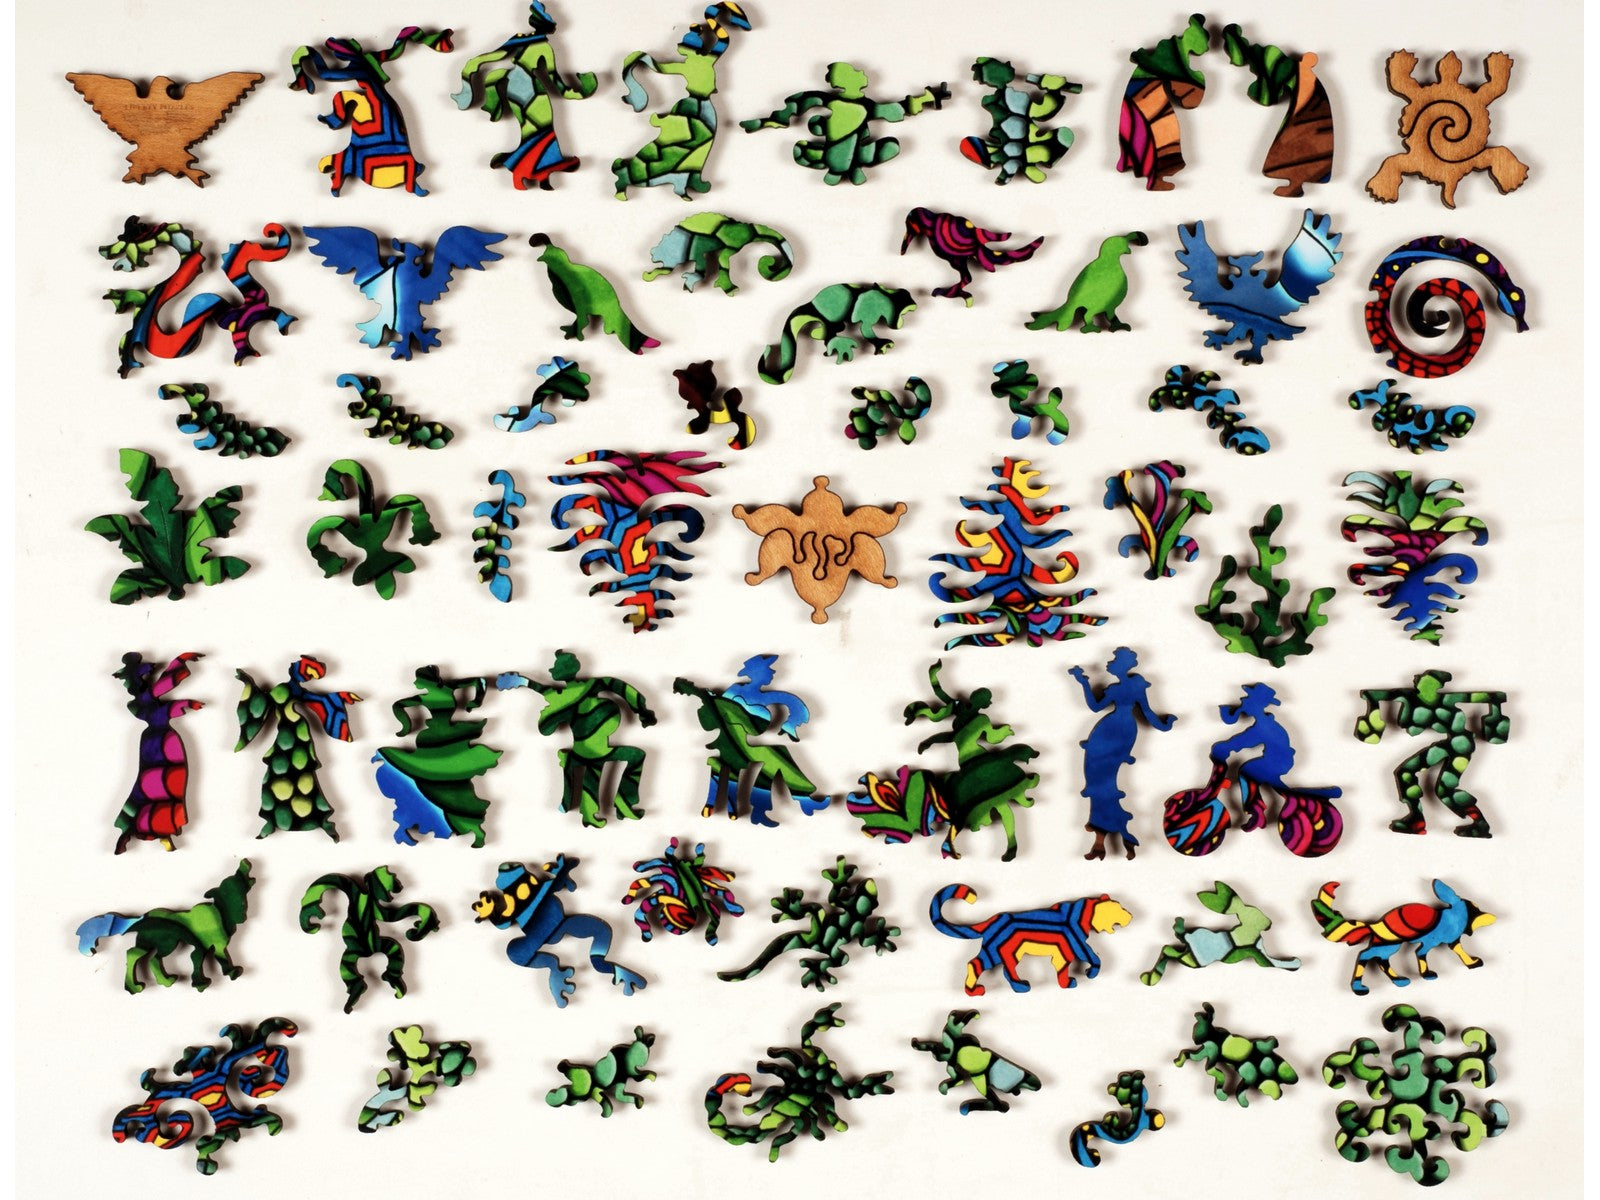 The whimsy pieces that can be found in the puzzle, Chameleon.